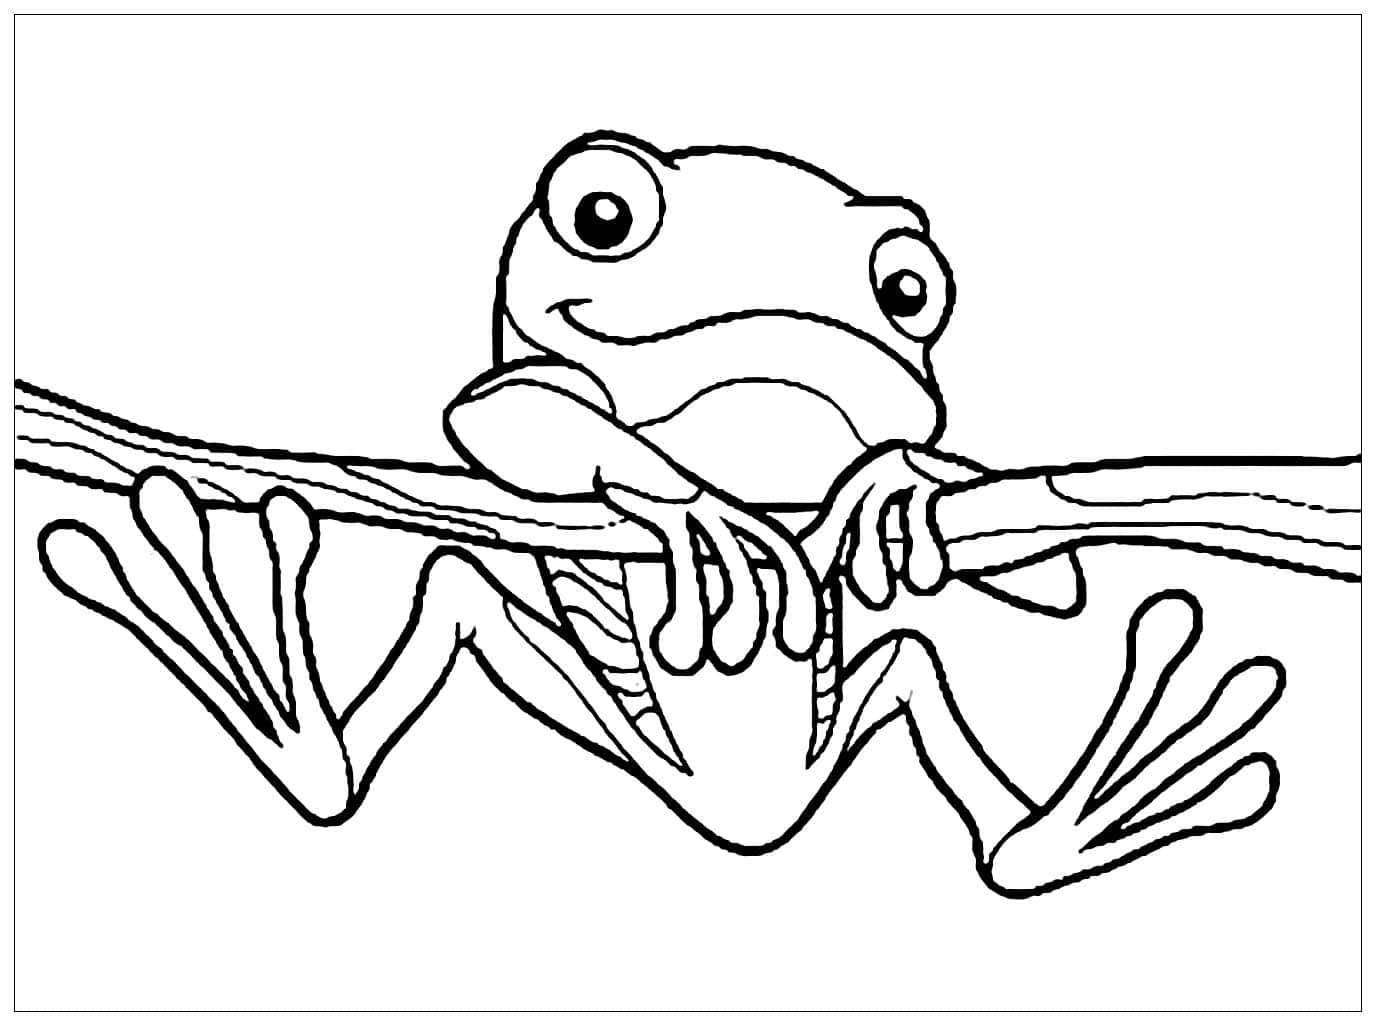 A Frog Sitting On A Branch Coloring Pages